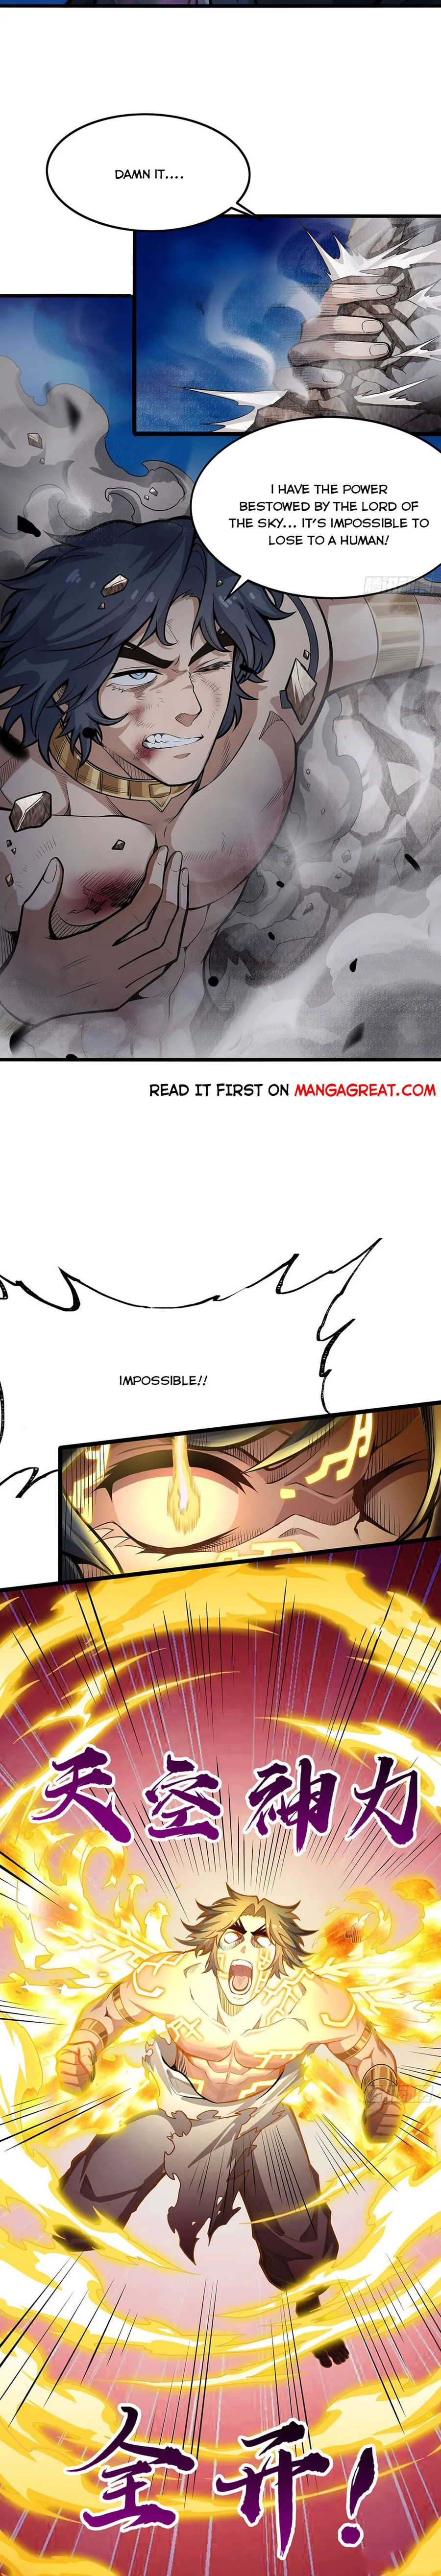 Read Tower Of God Chapter 302 - Manganelo